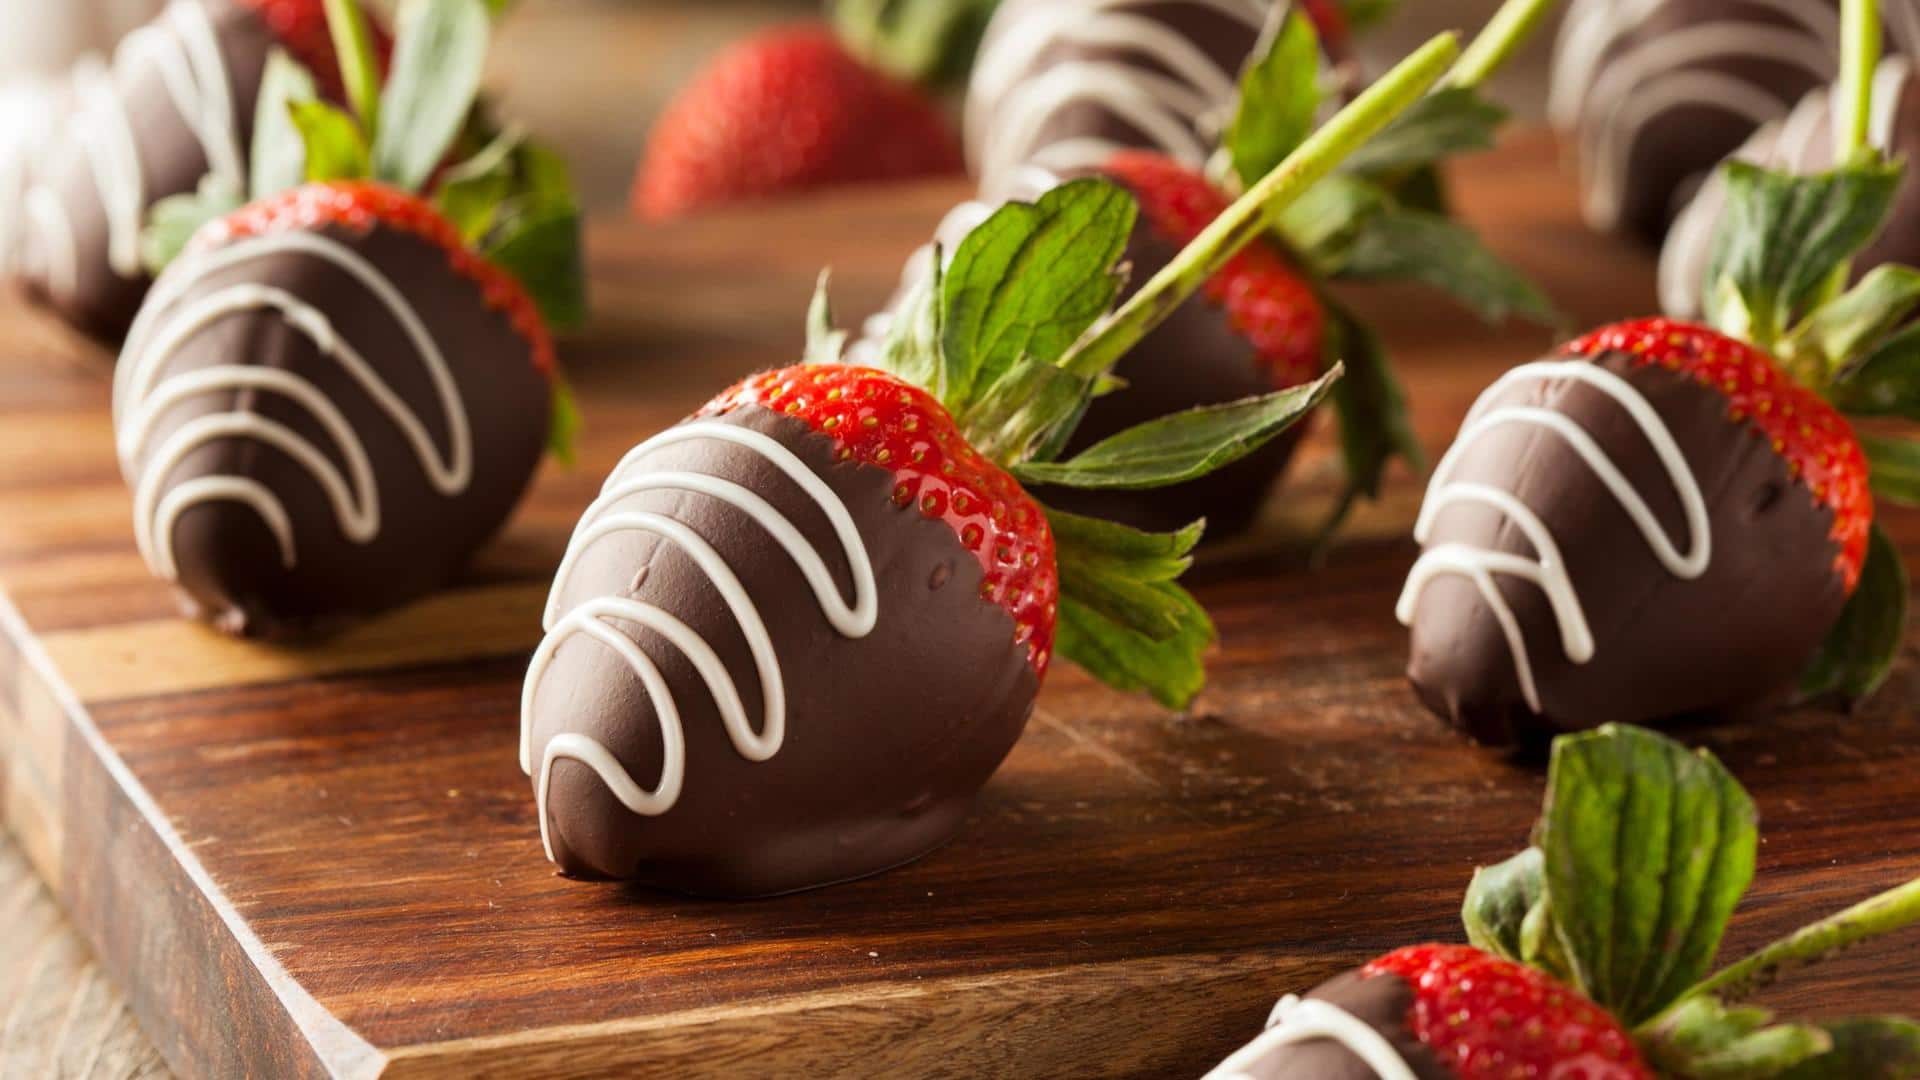 Valentine's Day: Surprise your boo with these strawberry-chocolate combo desserts